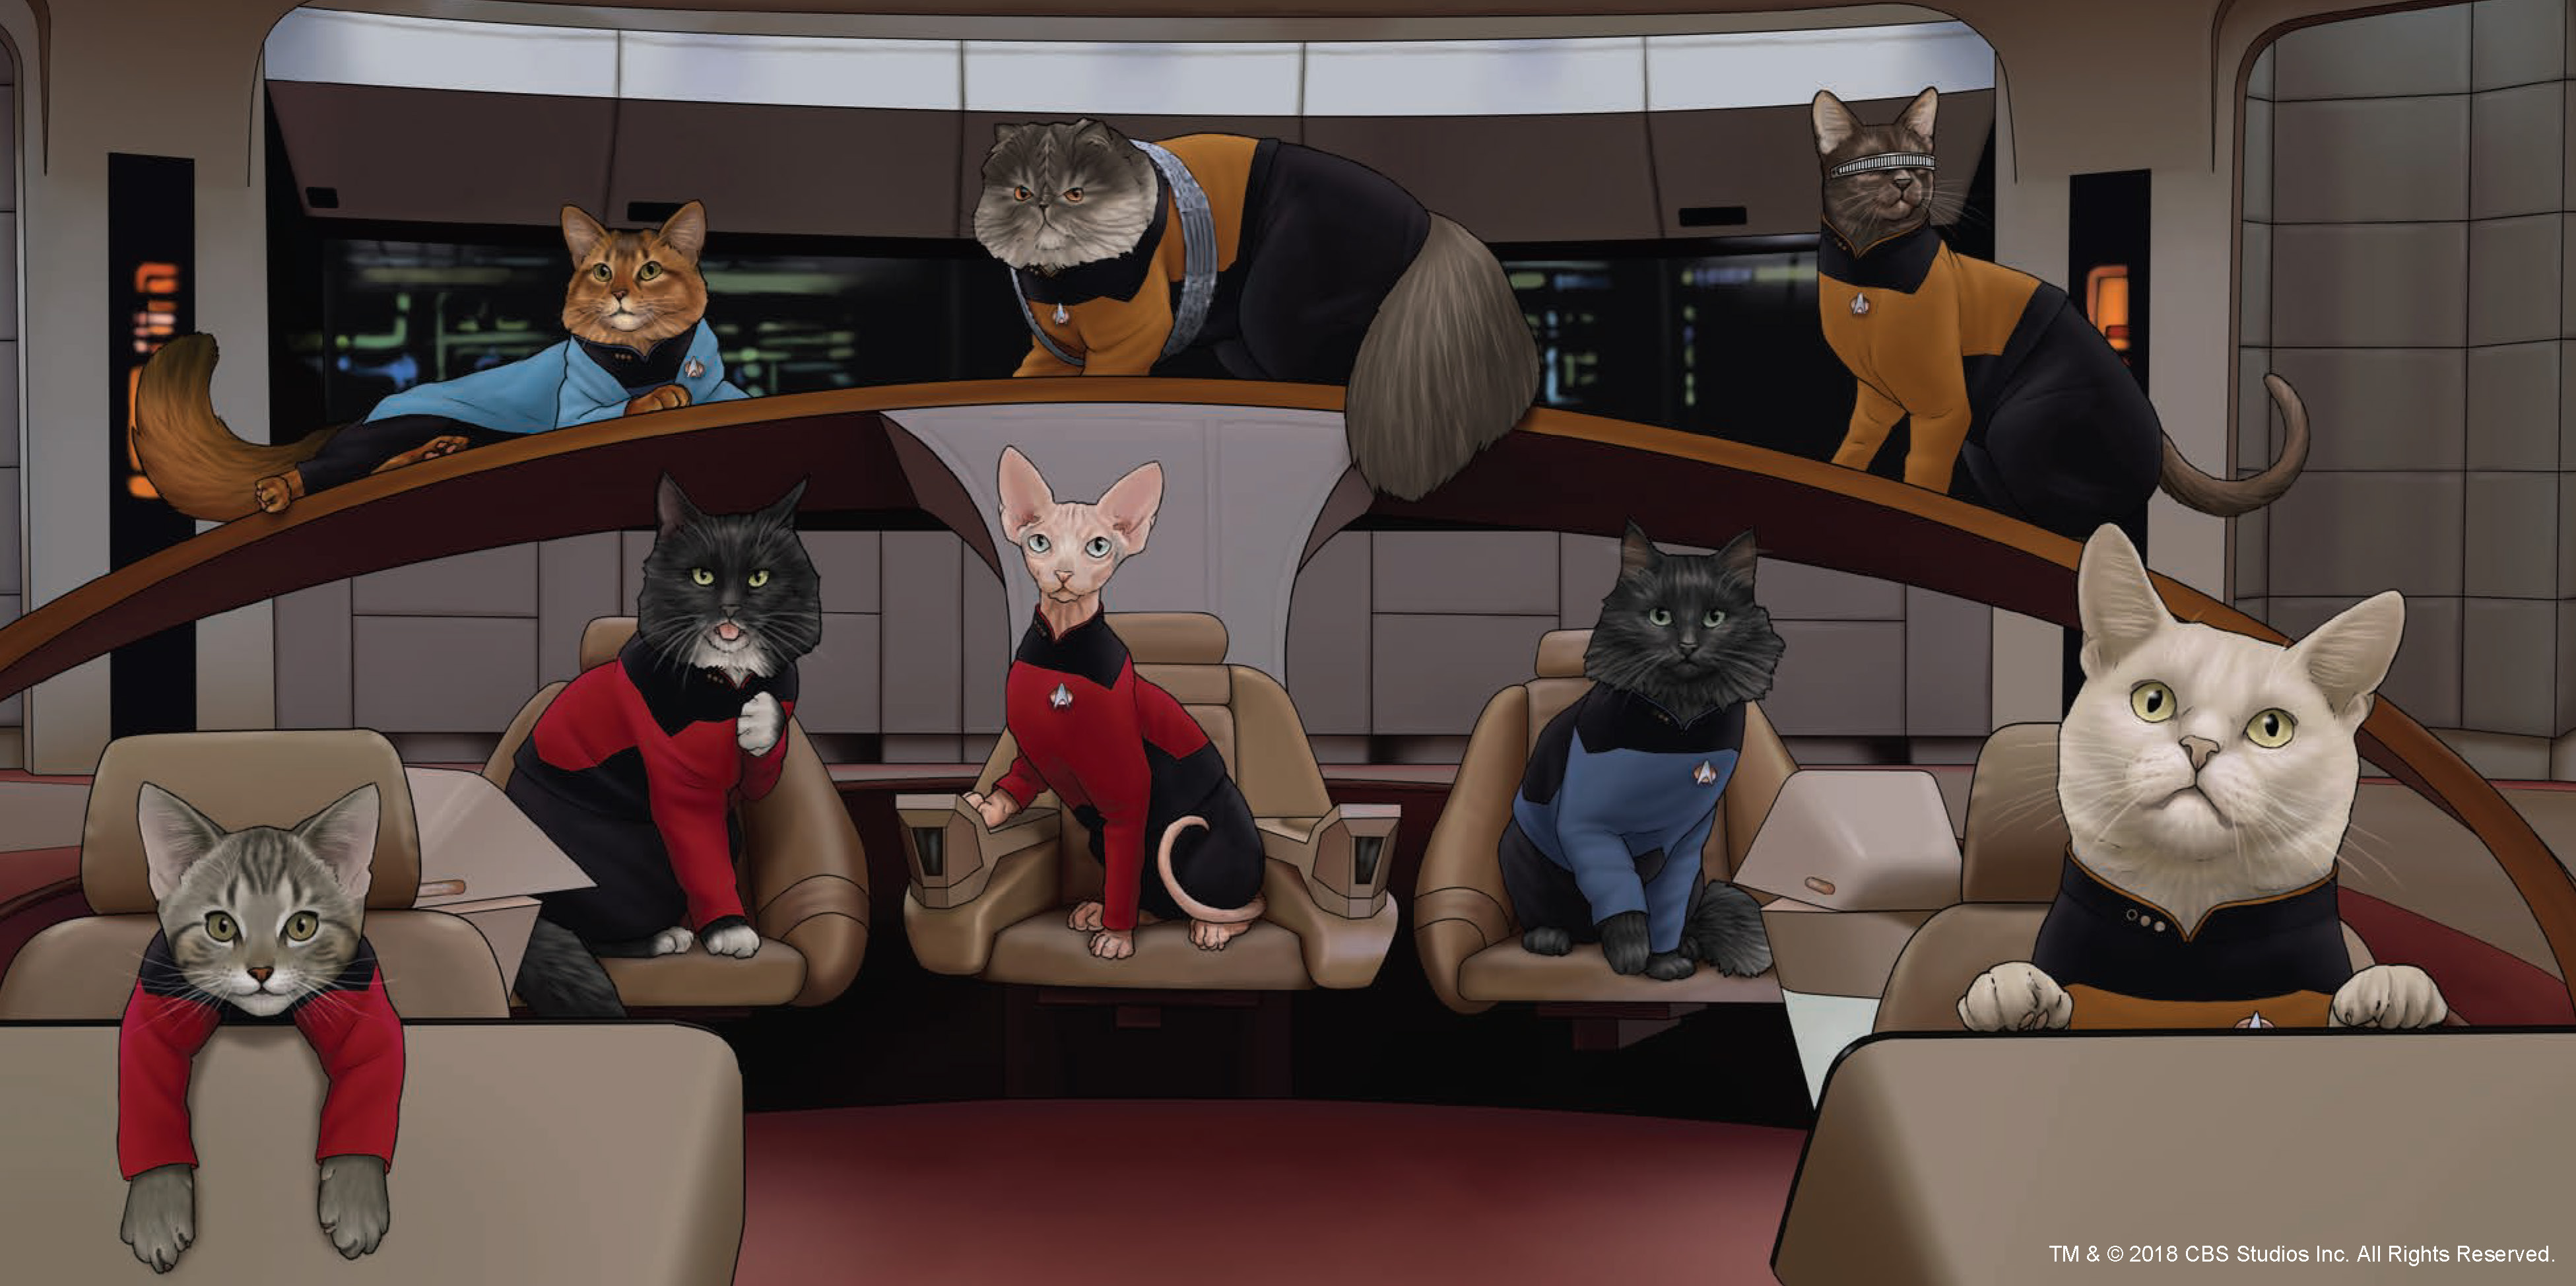 BOOK REVIEW ‘Star Trek The Next Generation Cats’ Combines Two Of Our